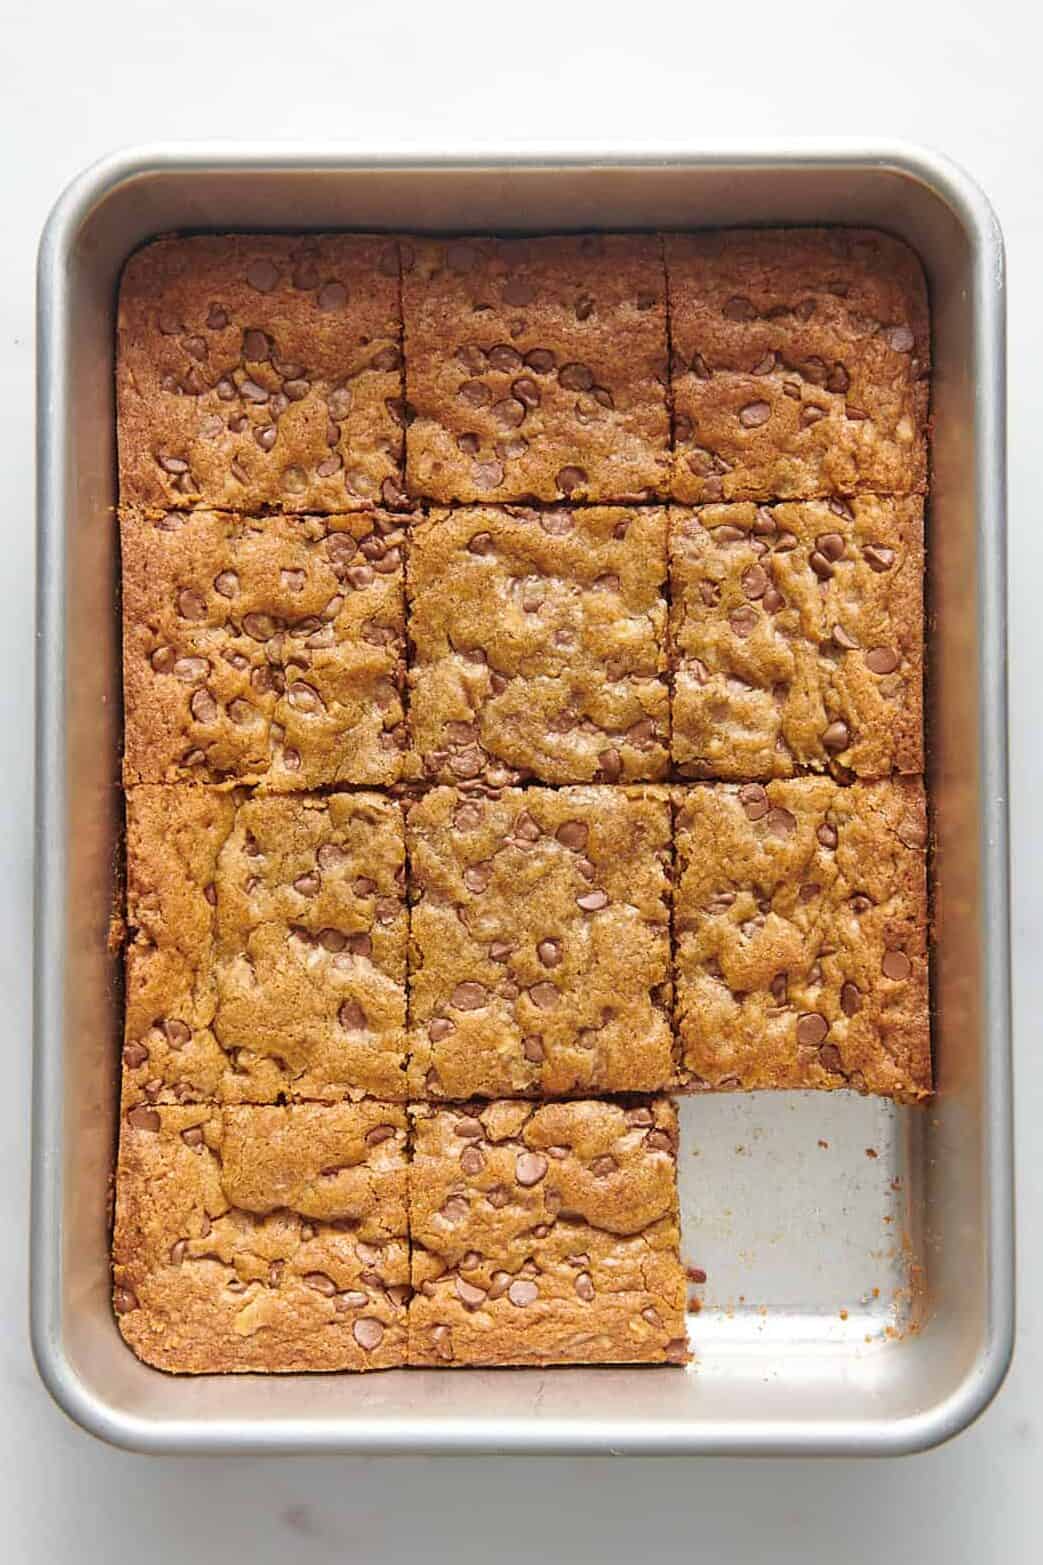 baked toll house chocolate chip cookie bars cut into 12 squares sitting in a 9x13 baking dish.